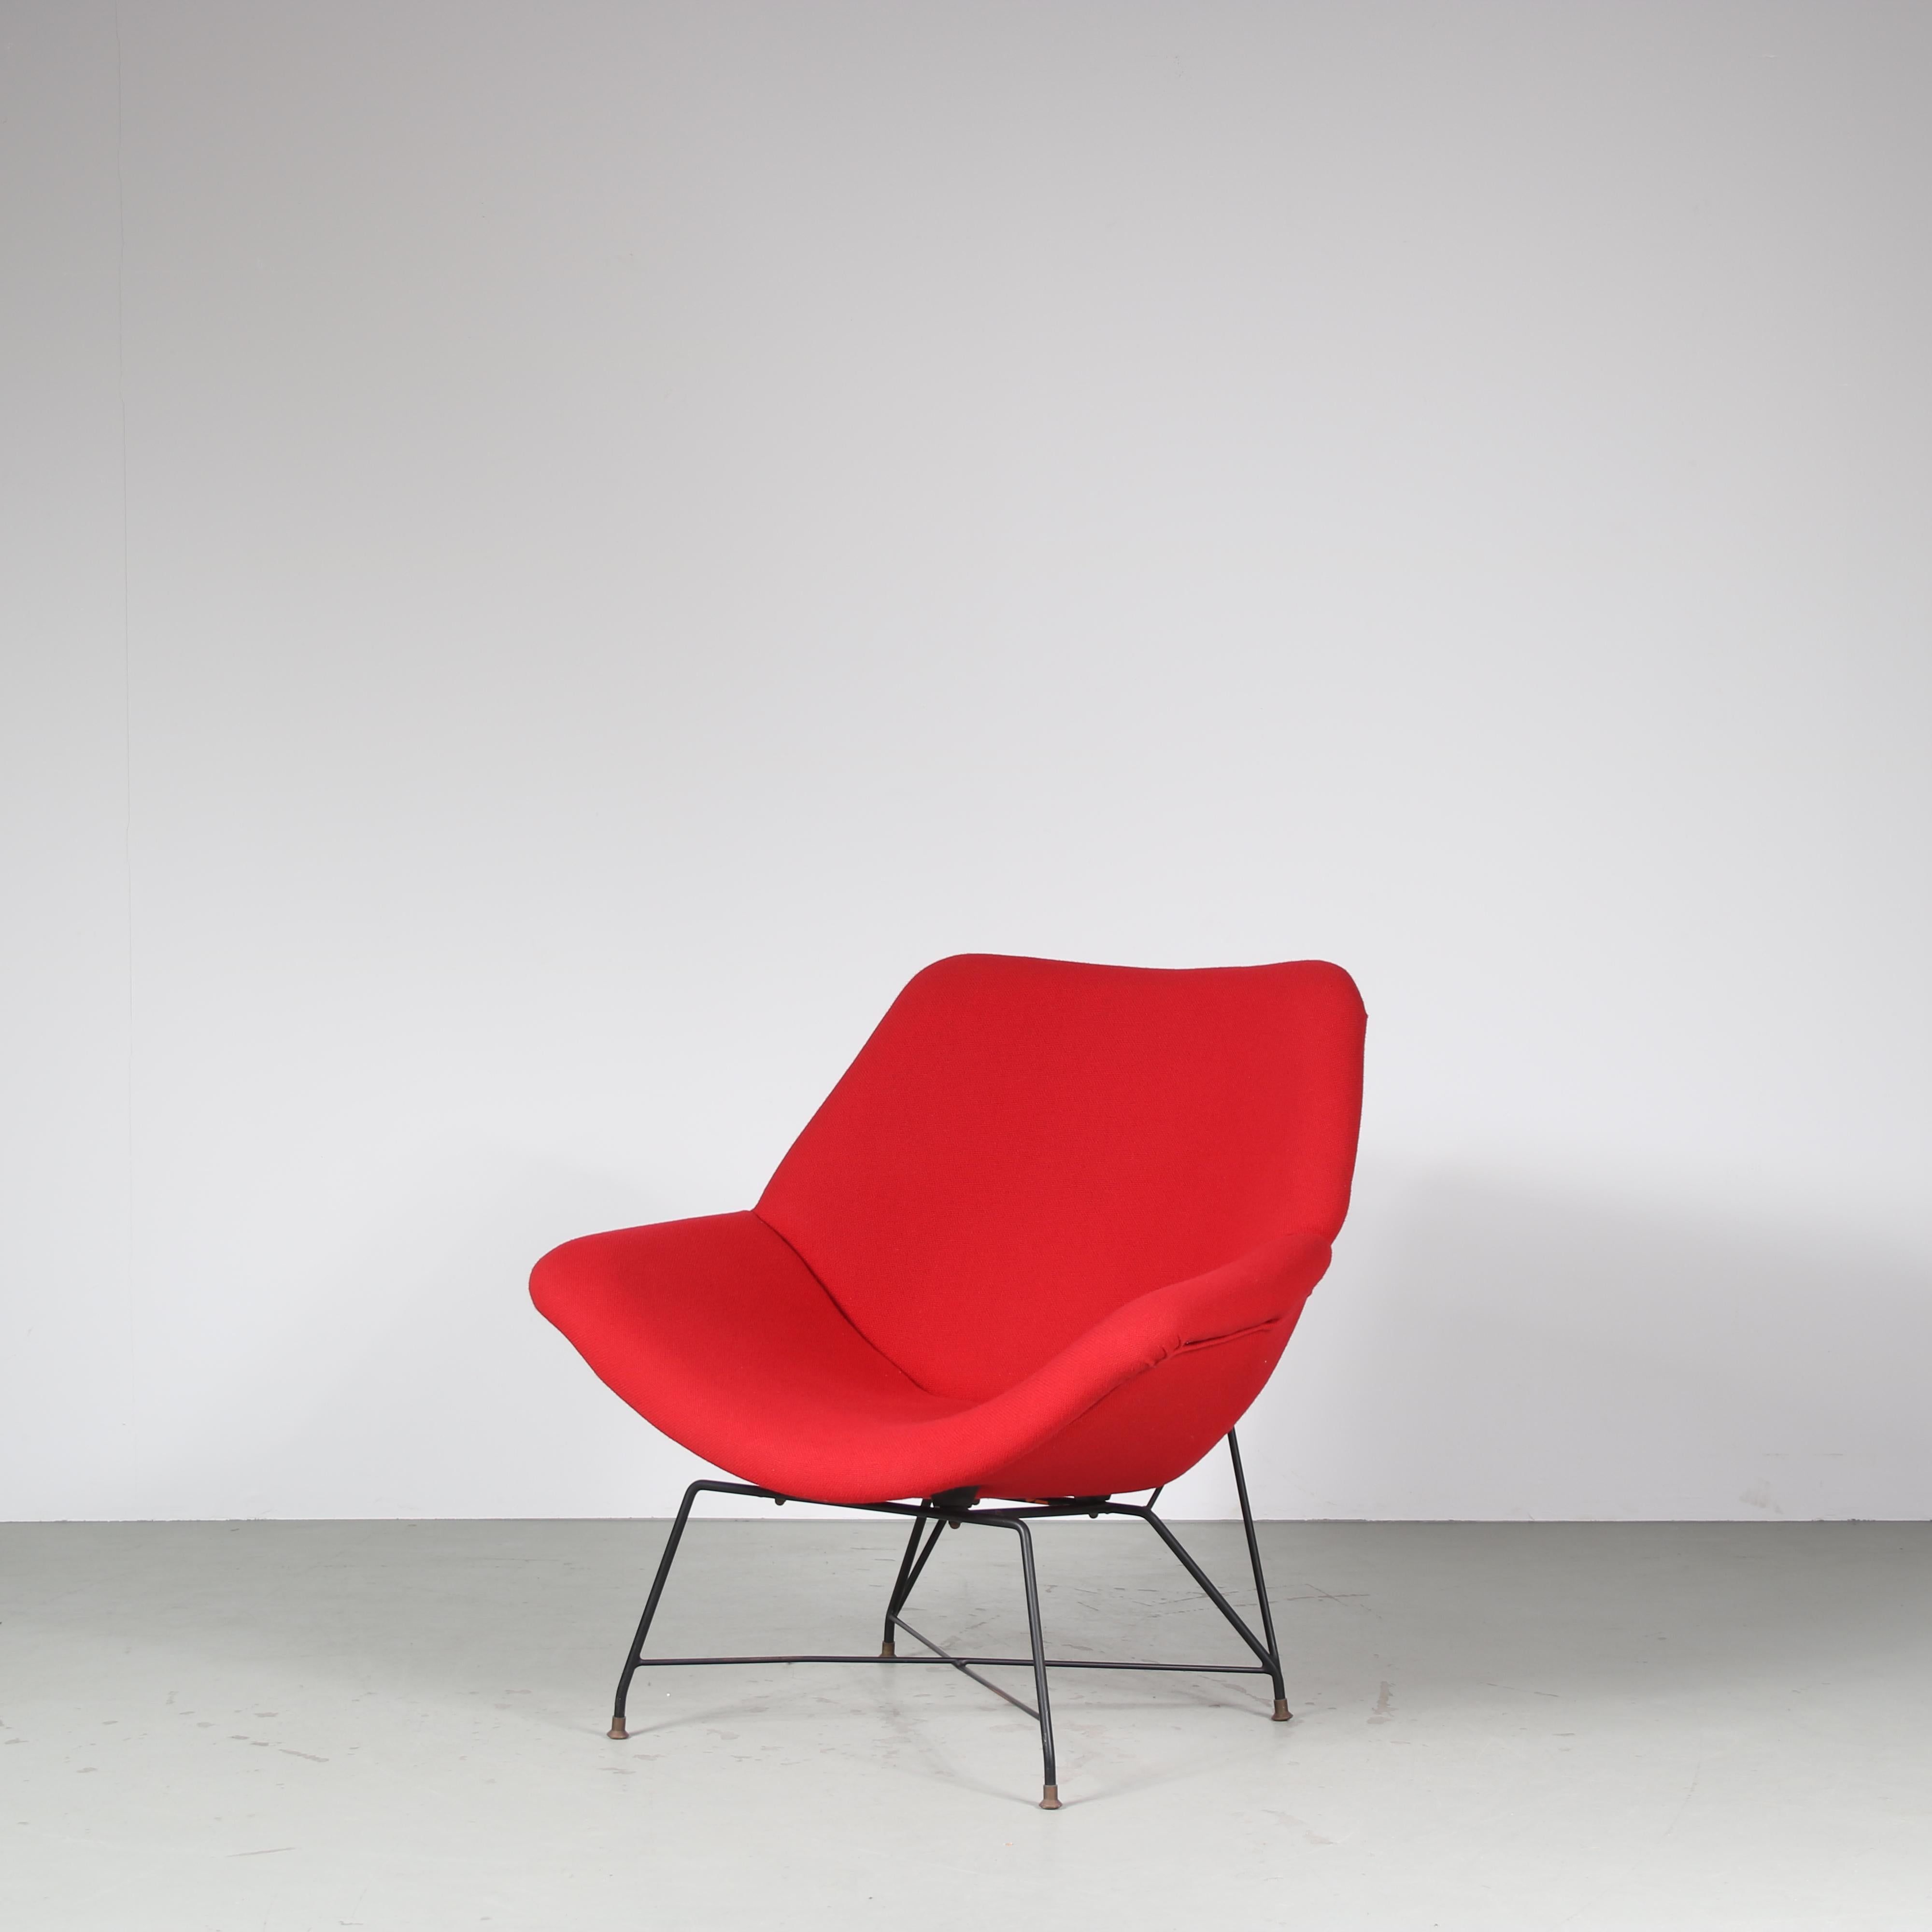 An impressive easy chair by Augusto Bozzi, manufactured by Saporiti in Italy in 1954.

This is a very rare and much sought after piece, the model is named “Kosmos”. The chair has a high quality black lacquered metal base and a beautiful red fabric